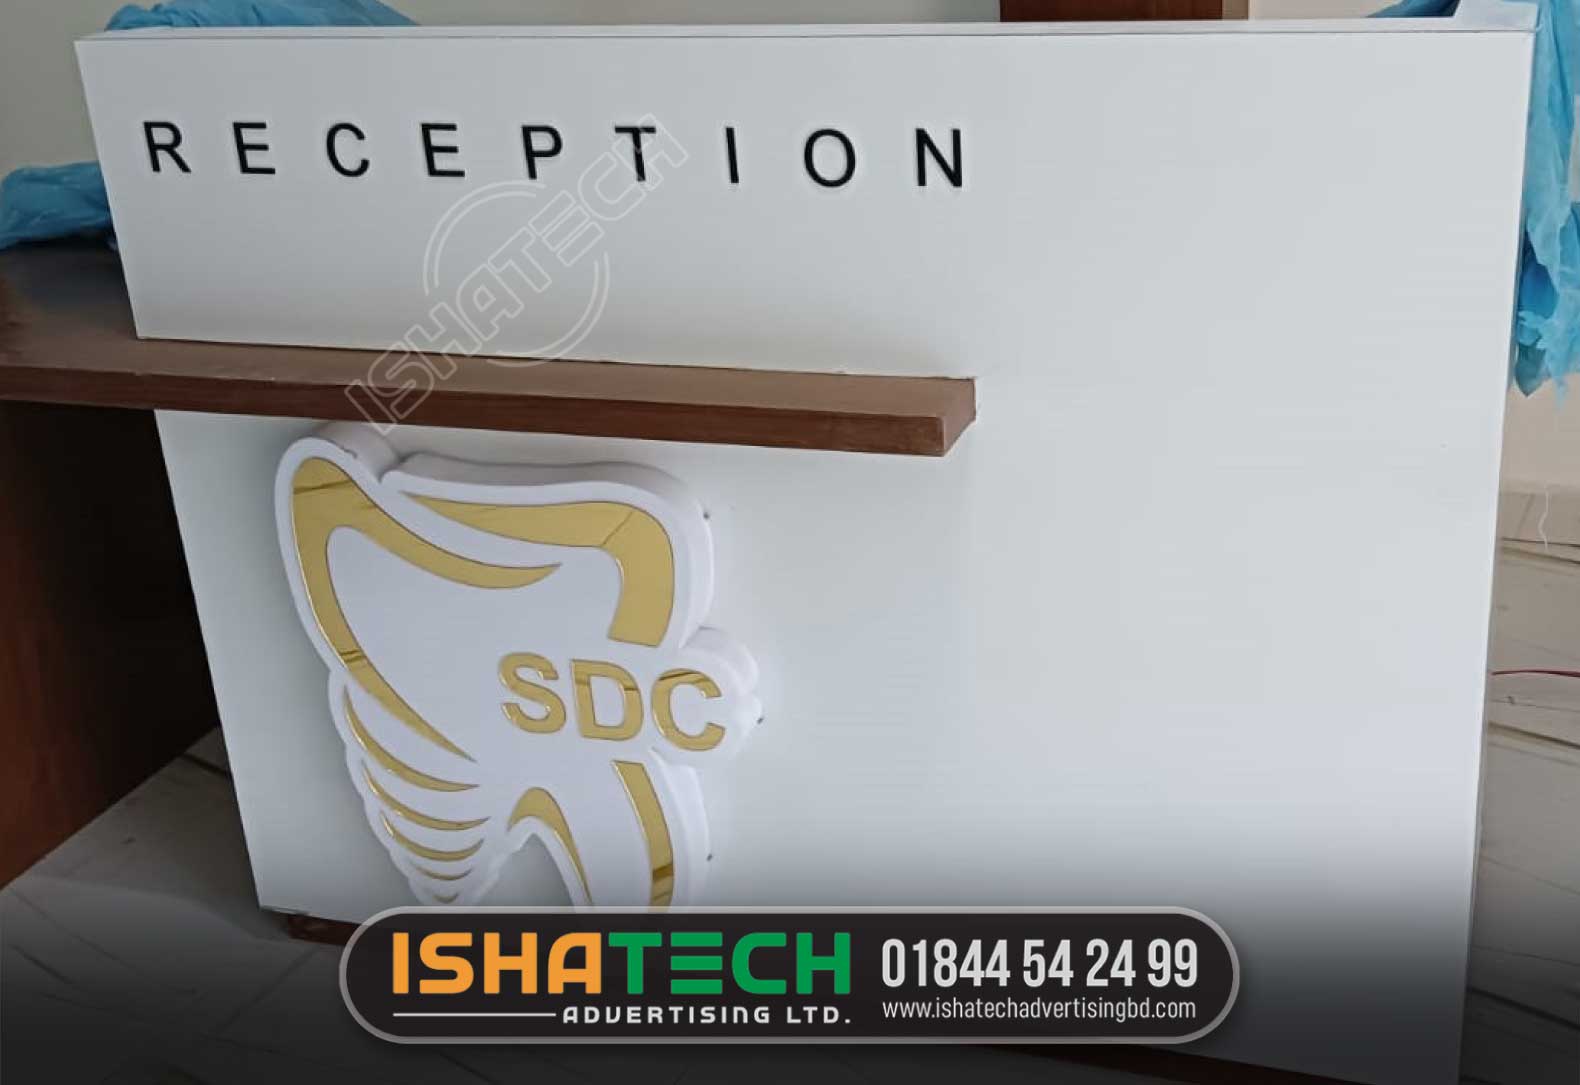 RECEPTION TOOTH/DENTAL SIGNS, BEST LETTER SIGNS MAKER IN DHAKA BANGLADESH